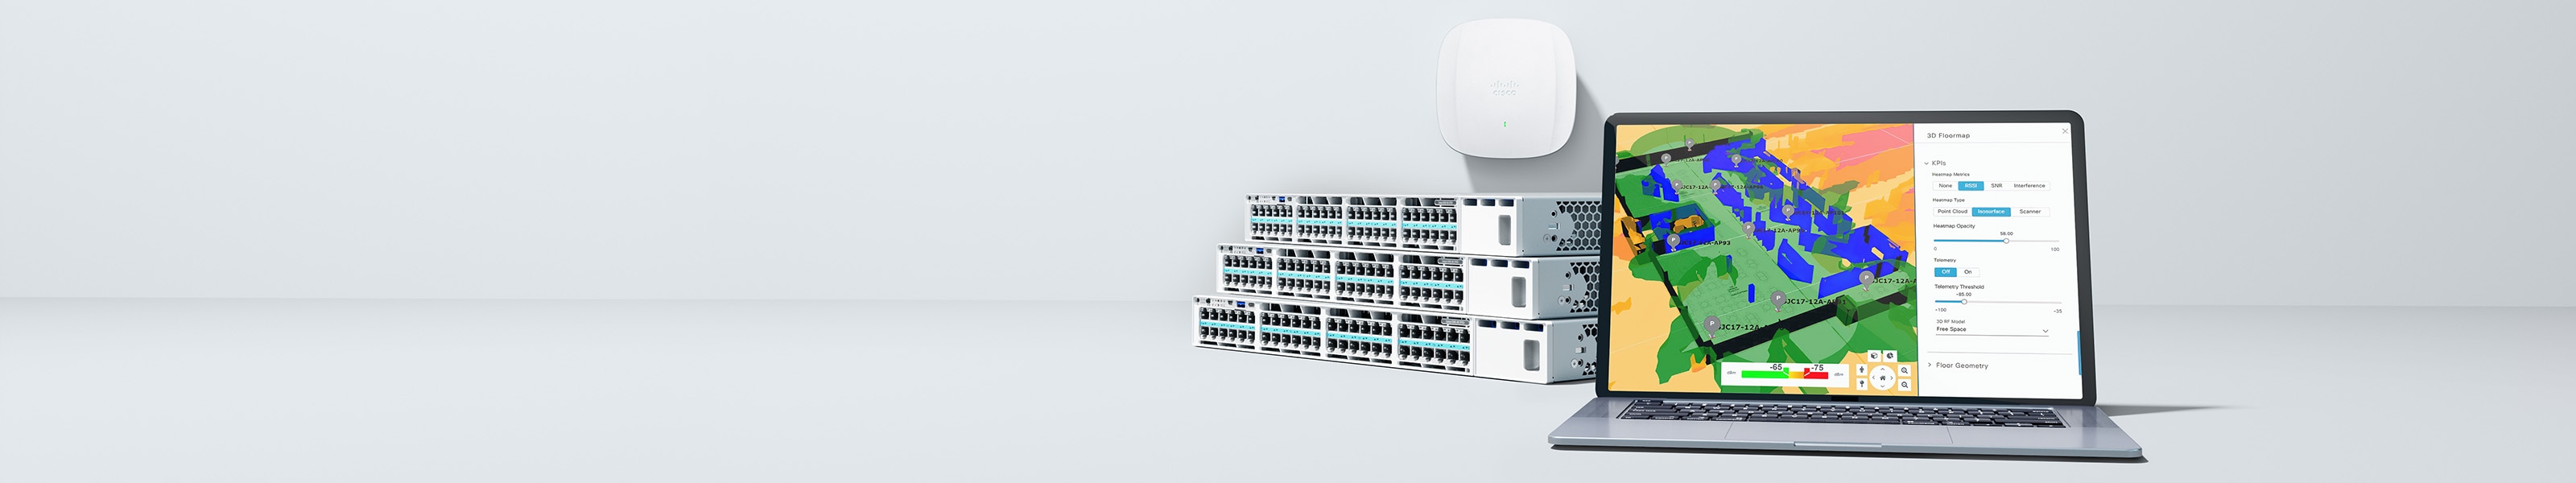 Wired and wireless Catalyst 9000 with Cisco Catalyst Center